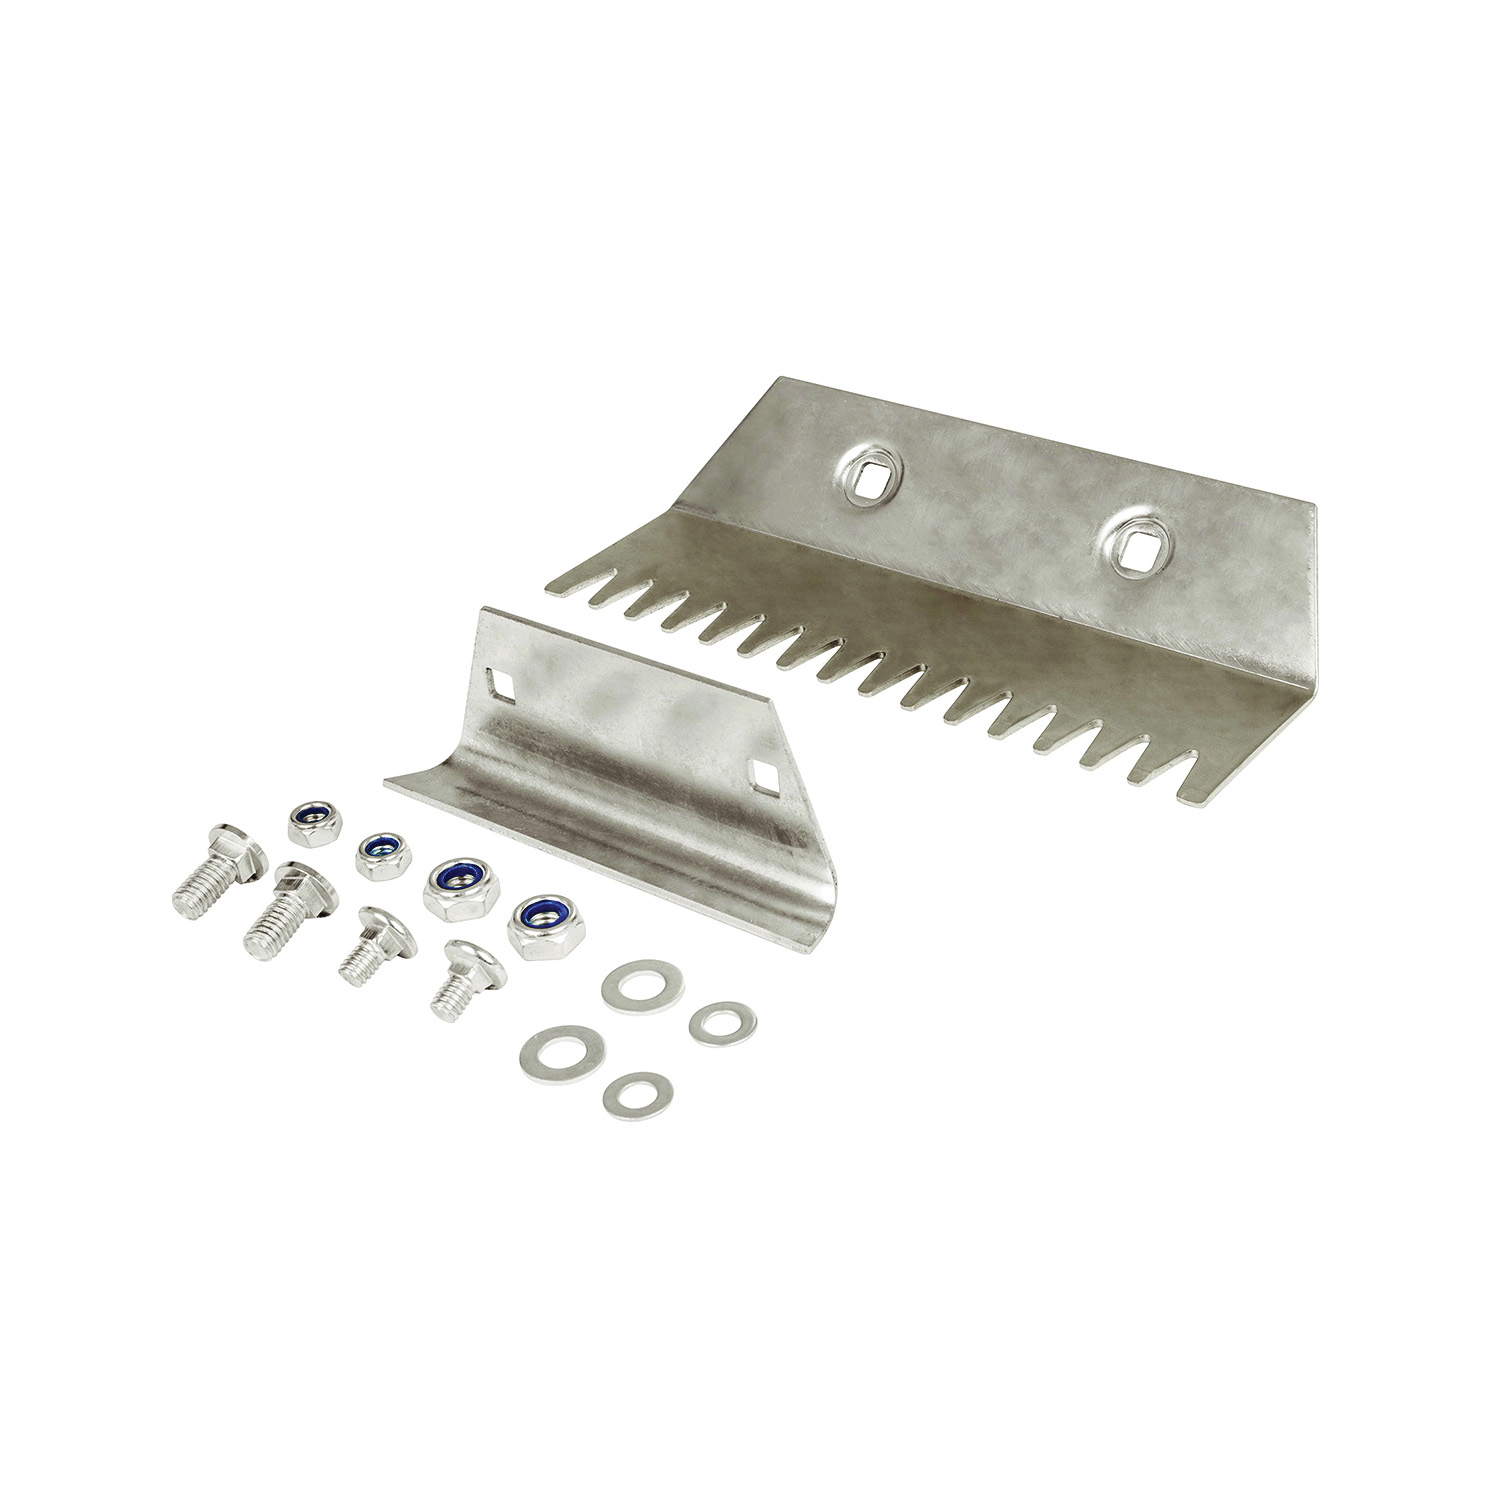 34369 Replacement Blade Set for SKU 986-7847, For: Shingle Remover